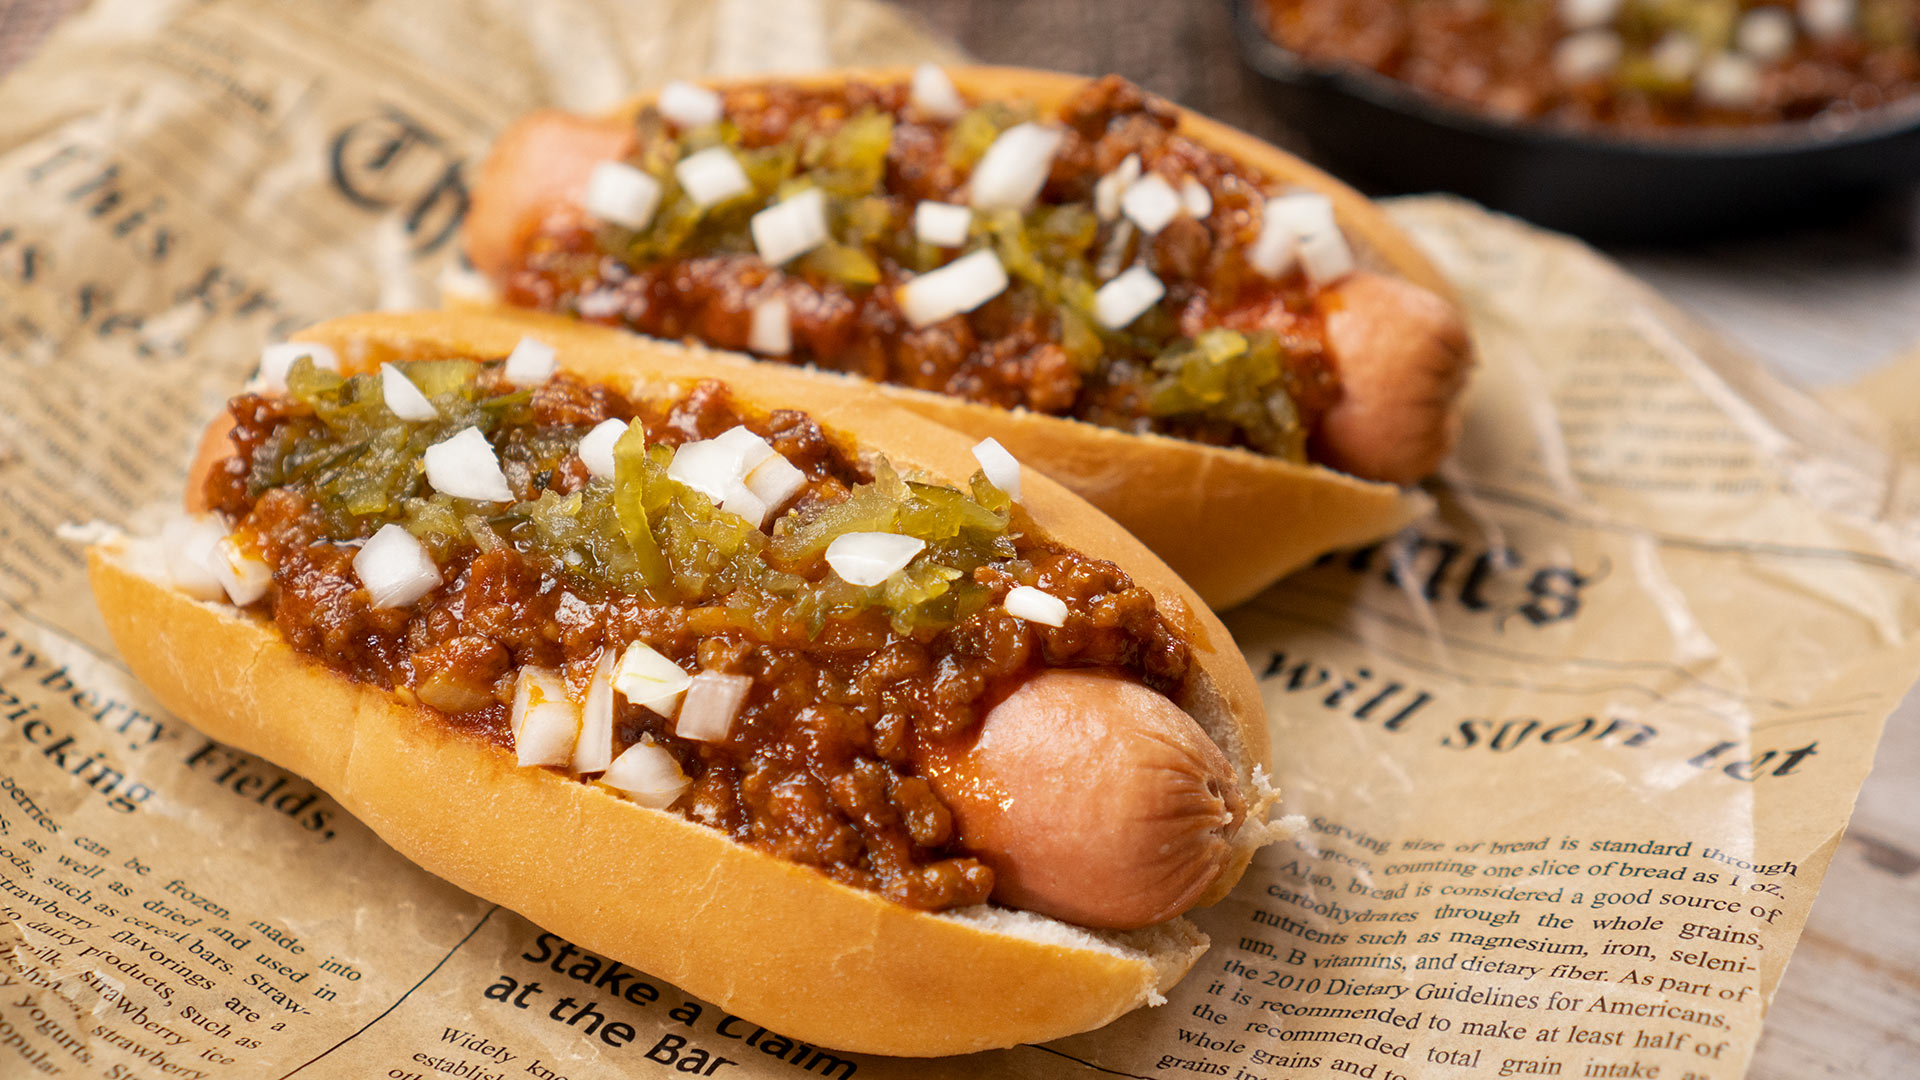 Chili Cheese Dog Dairy Queen